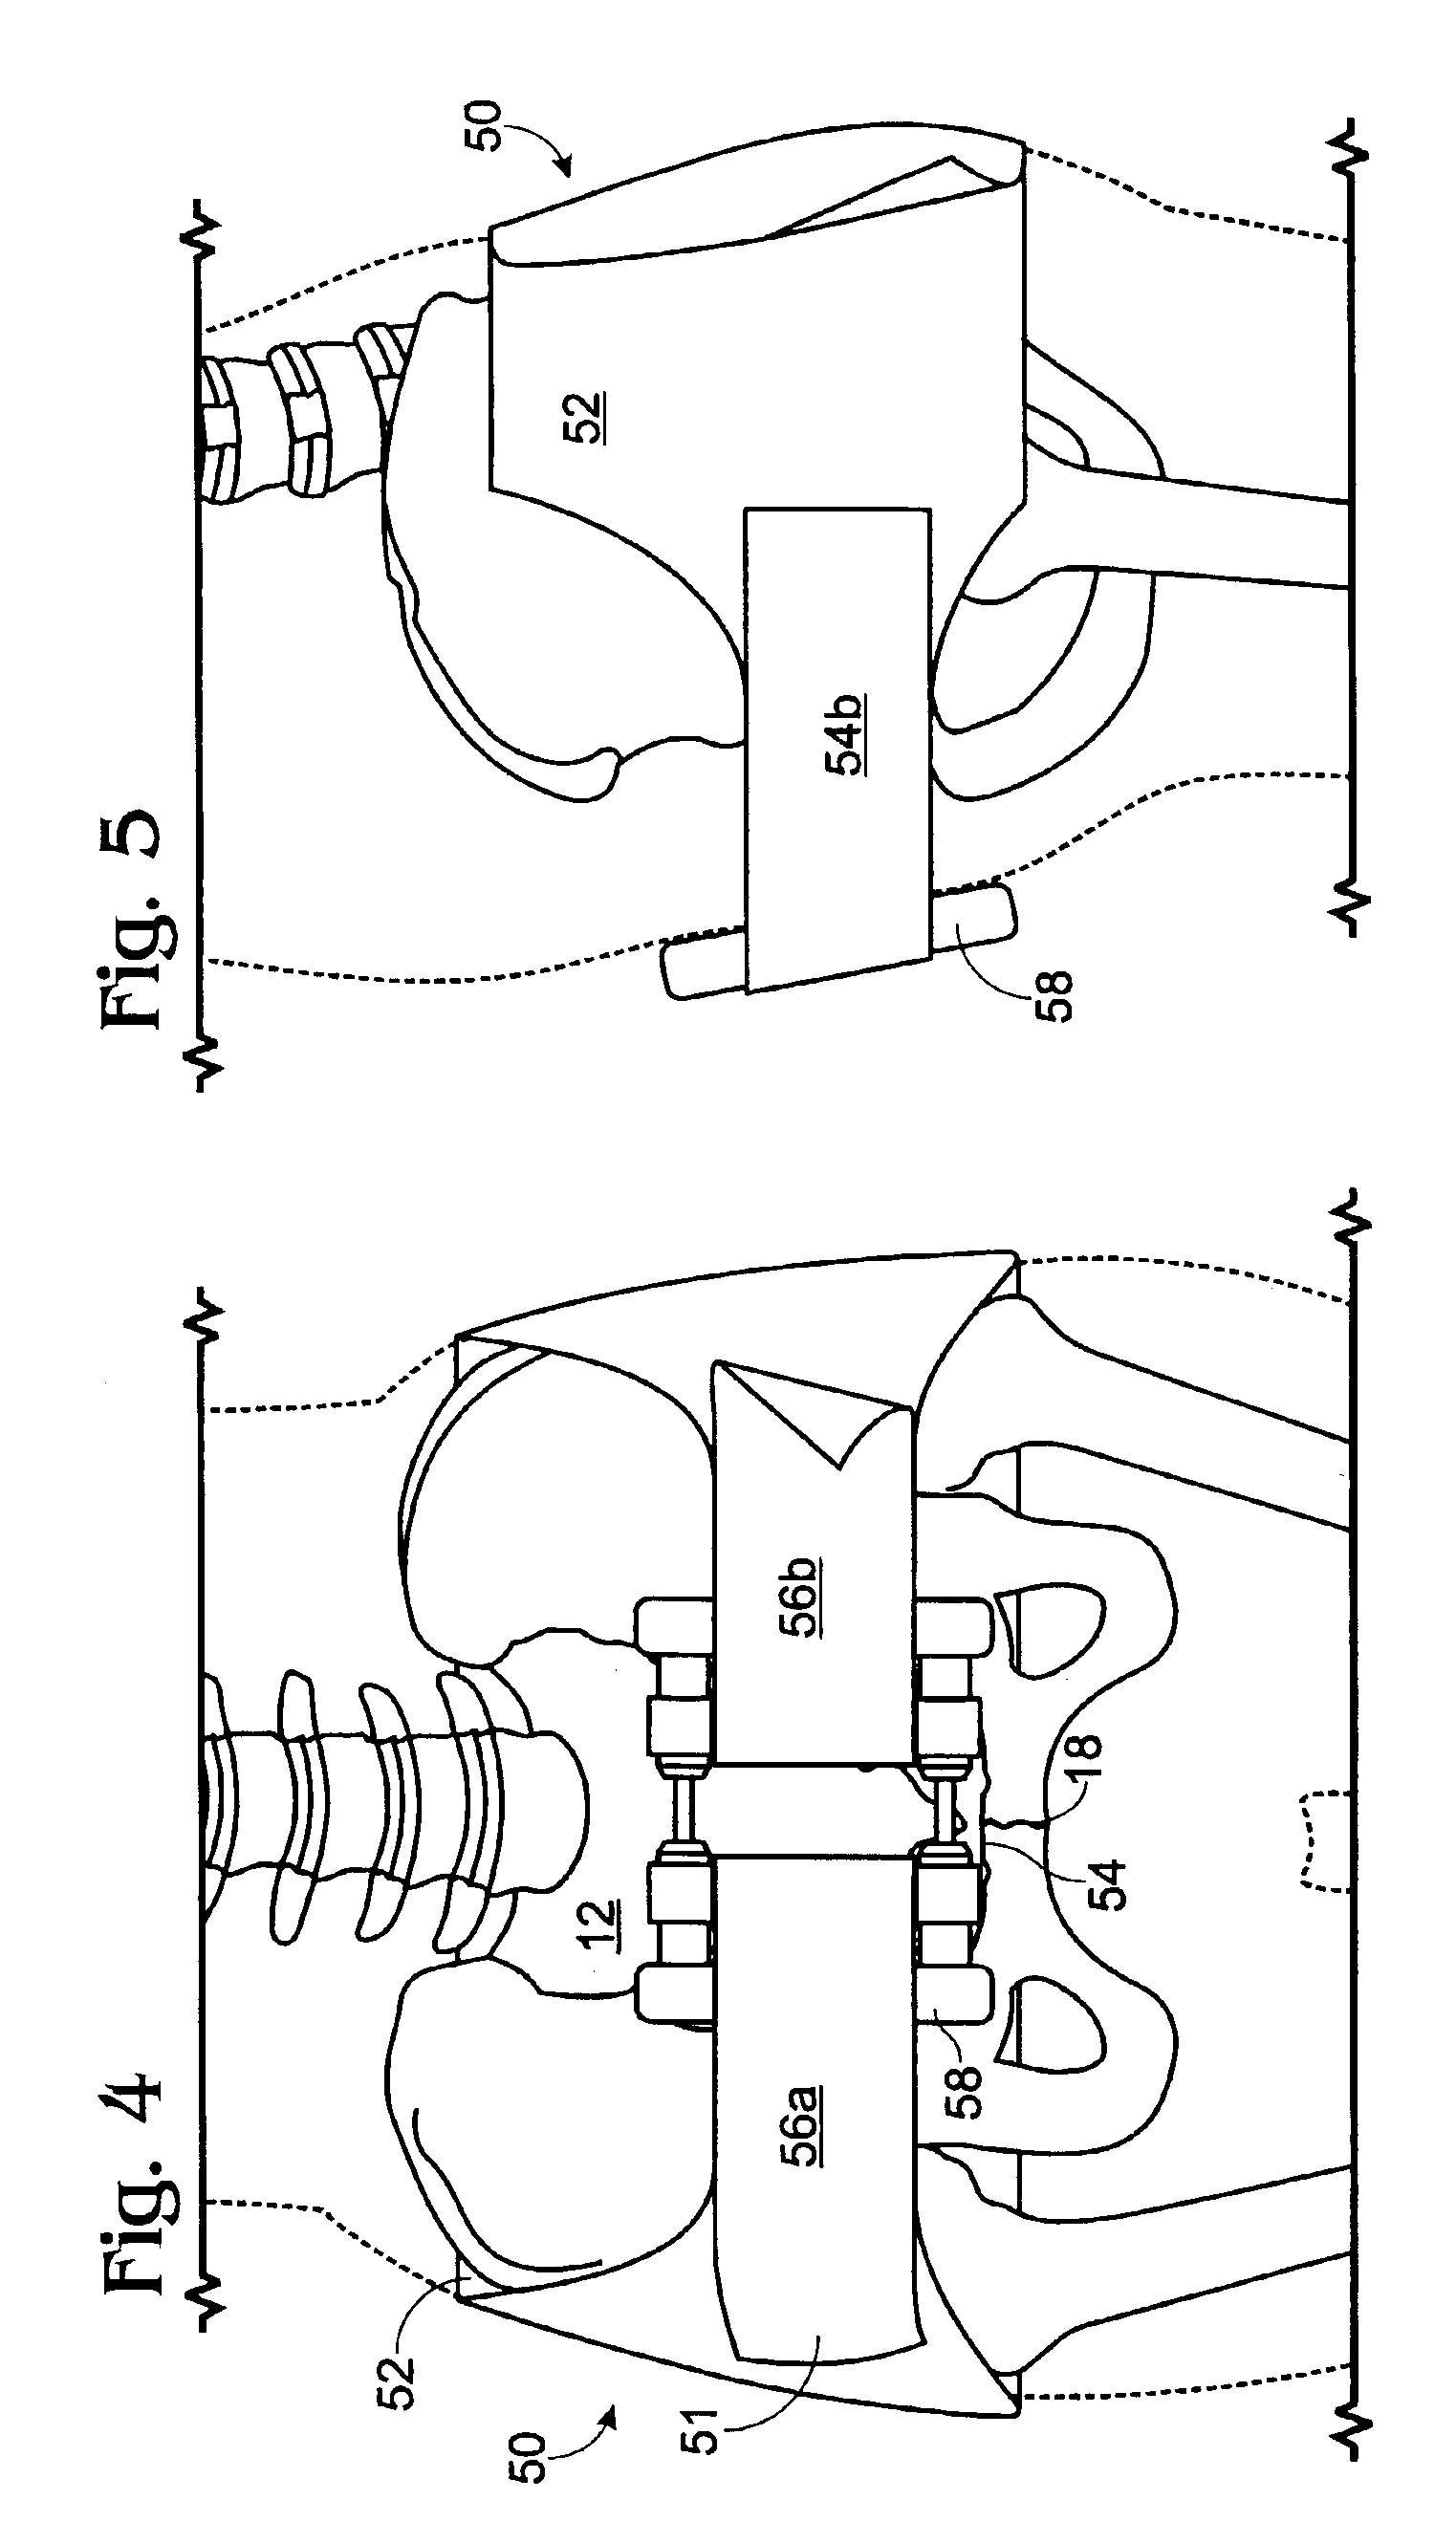 Apparatus and method for stabilizing pelvic ring disruption